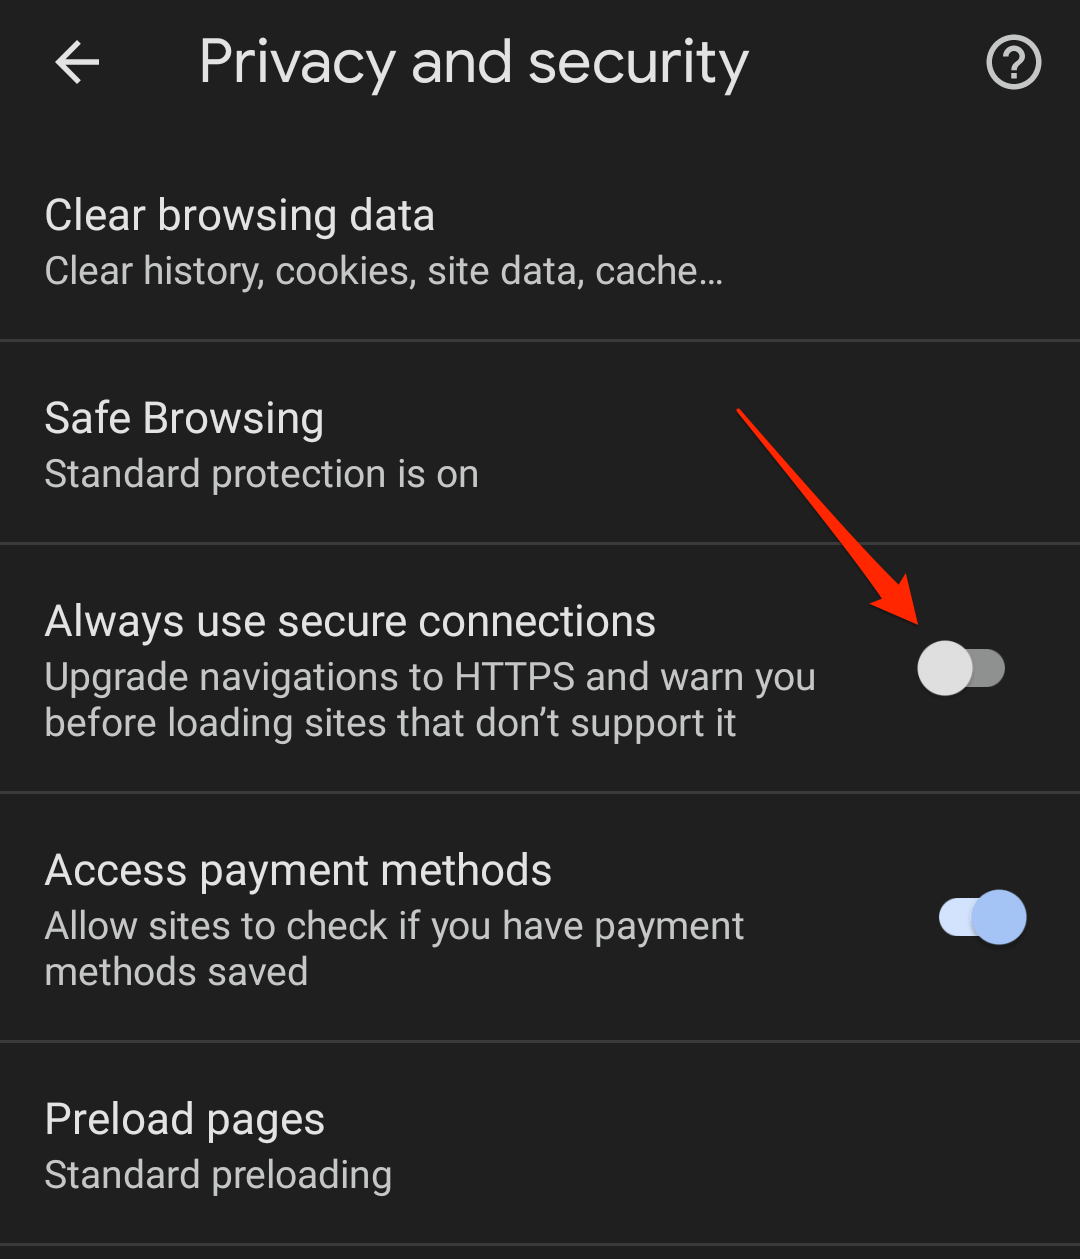 Always use secure connections turned off in Chrome Android